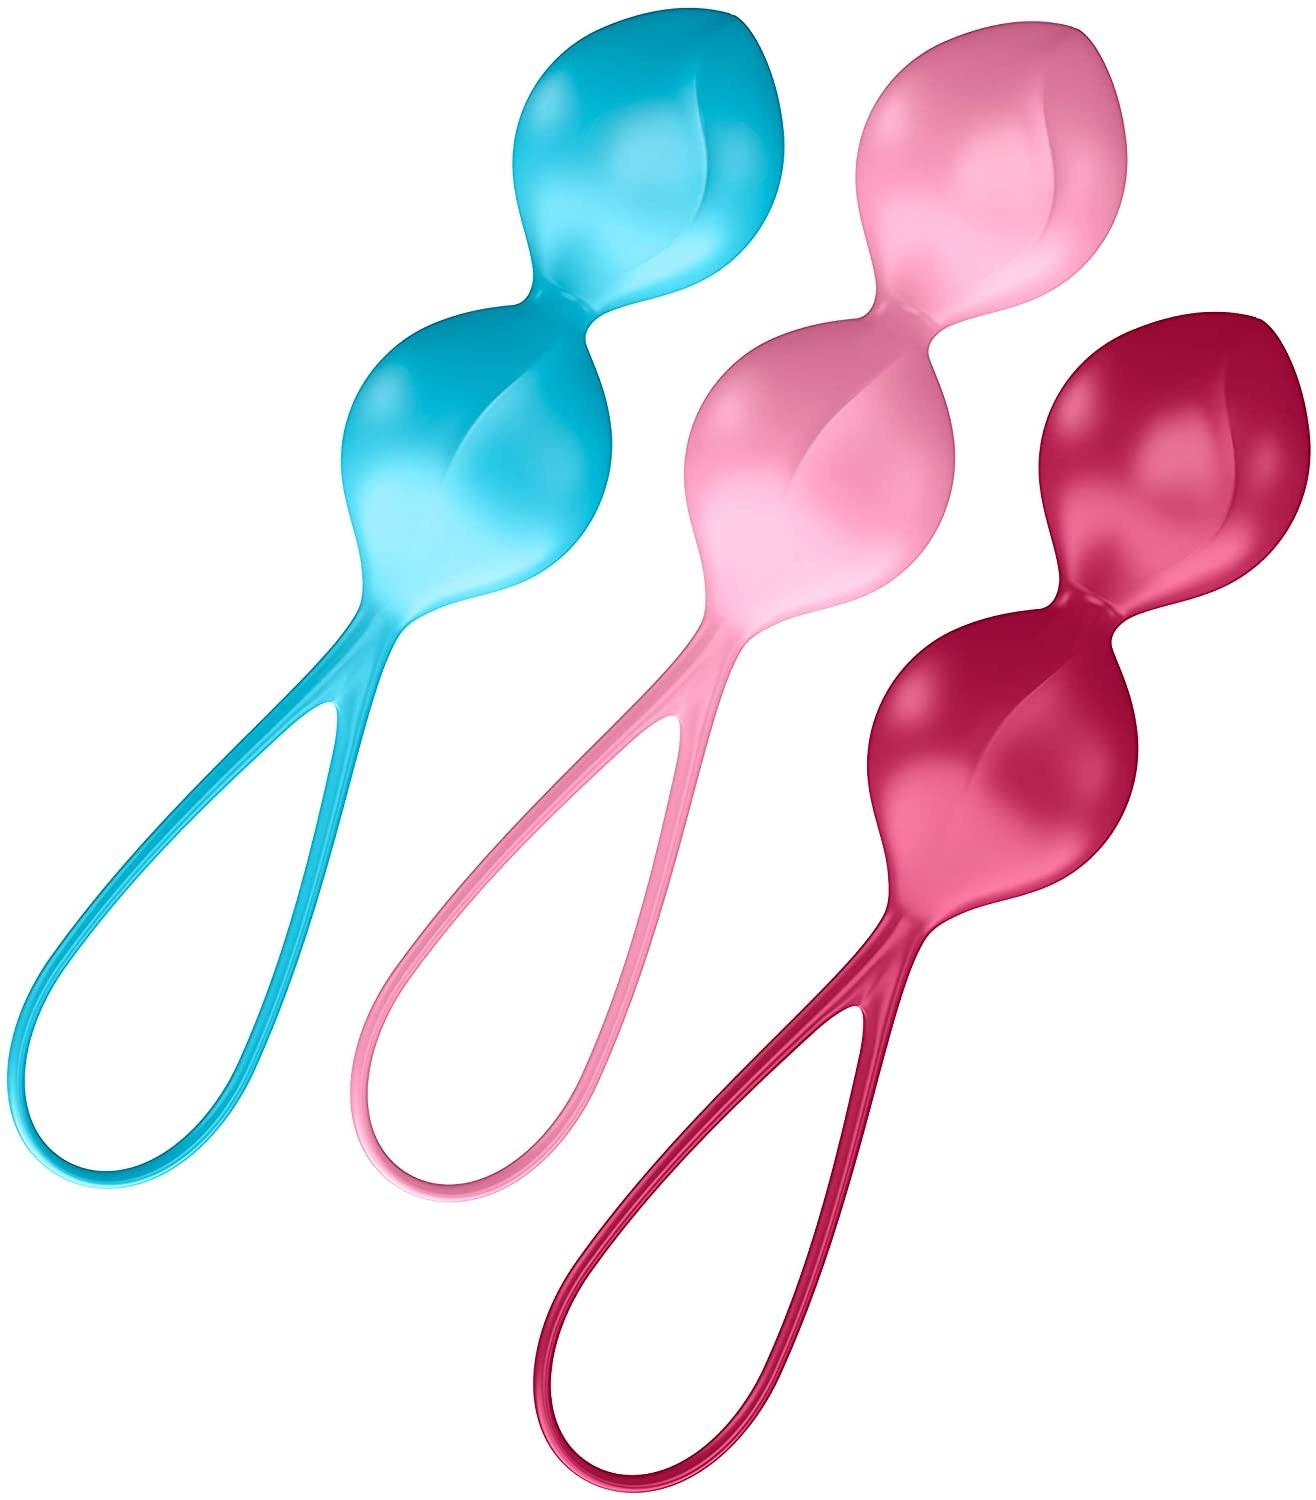 The blue, pink, and red double fixed kegel balls with strap